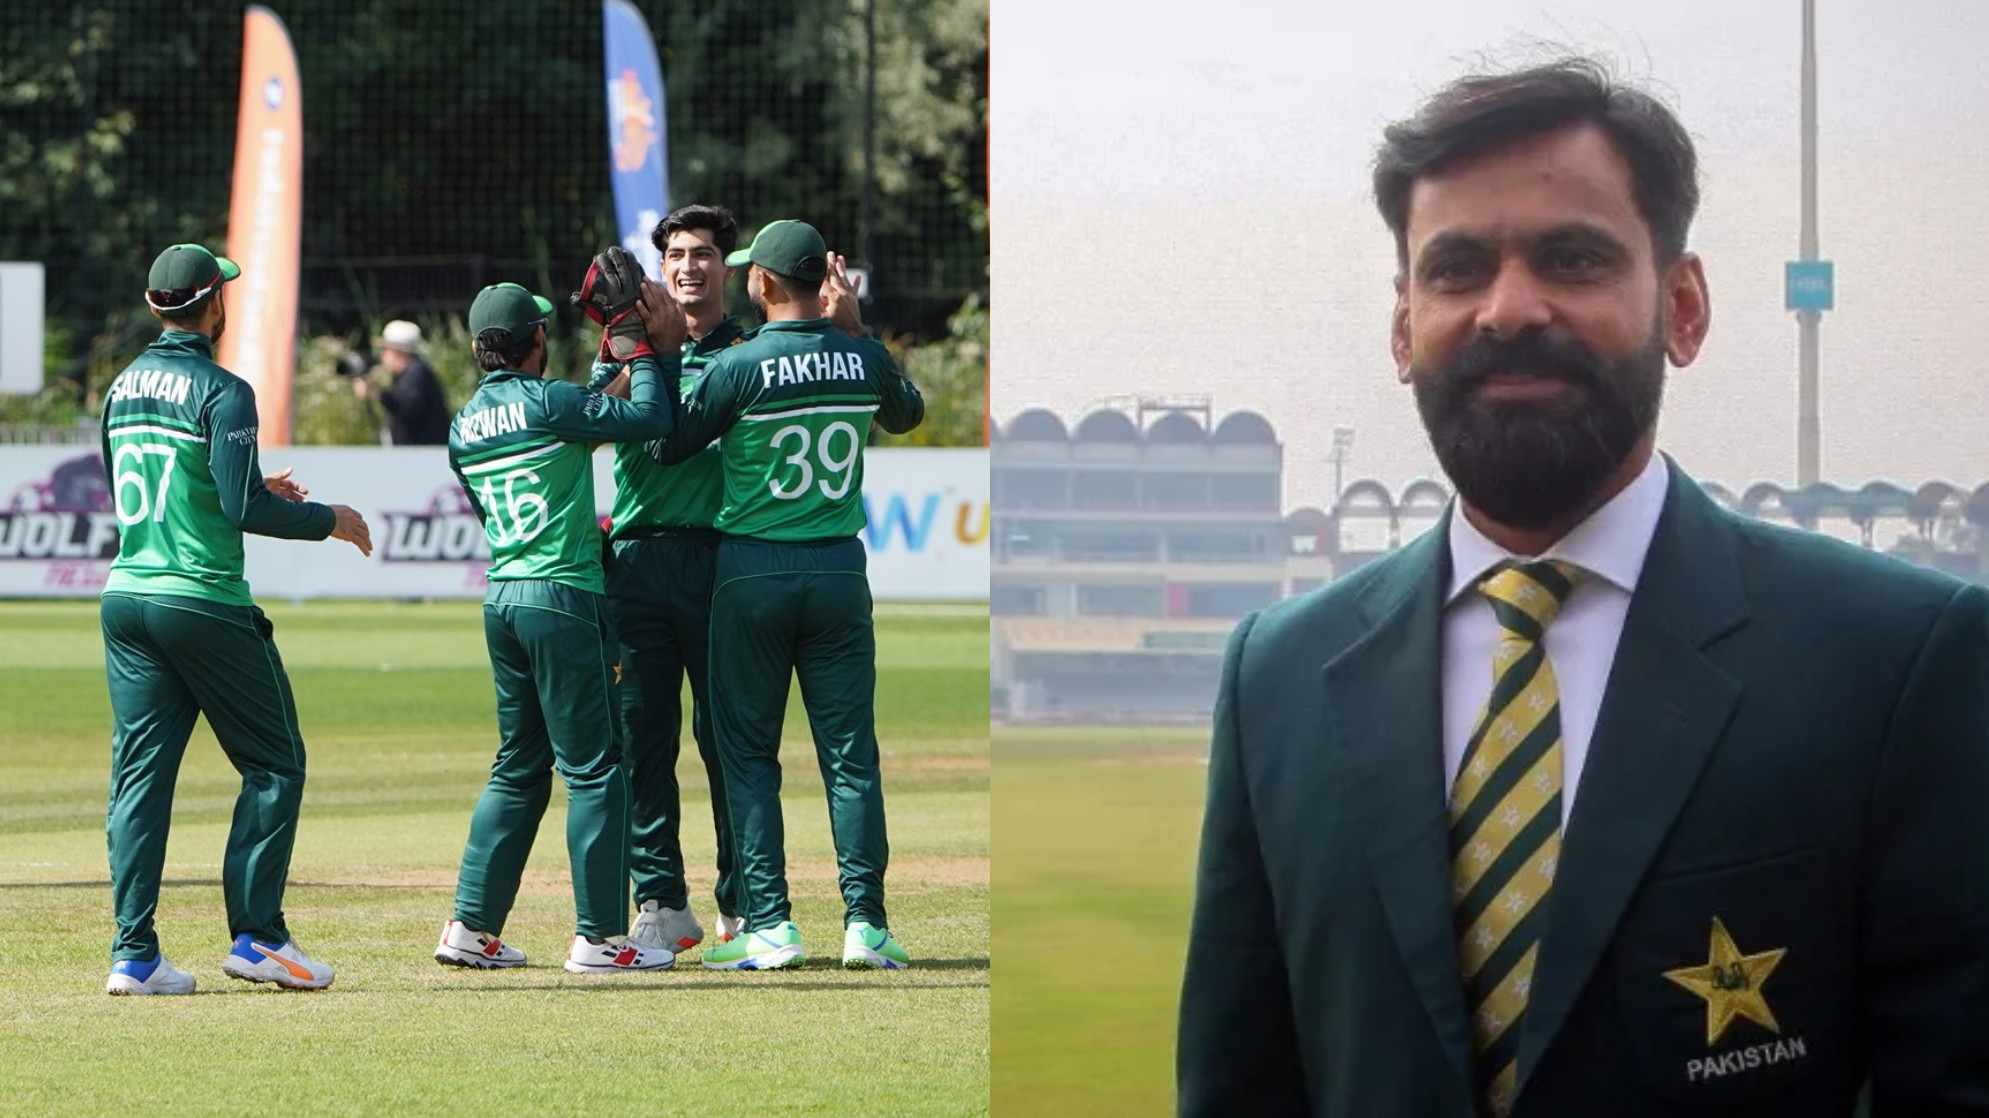 NED v PAK 2022: Pakistan management under pressure to play full strength team- Mohammad Hafeez after close win in 1st ODI